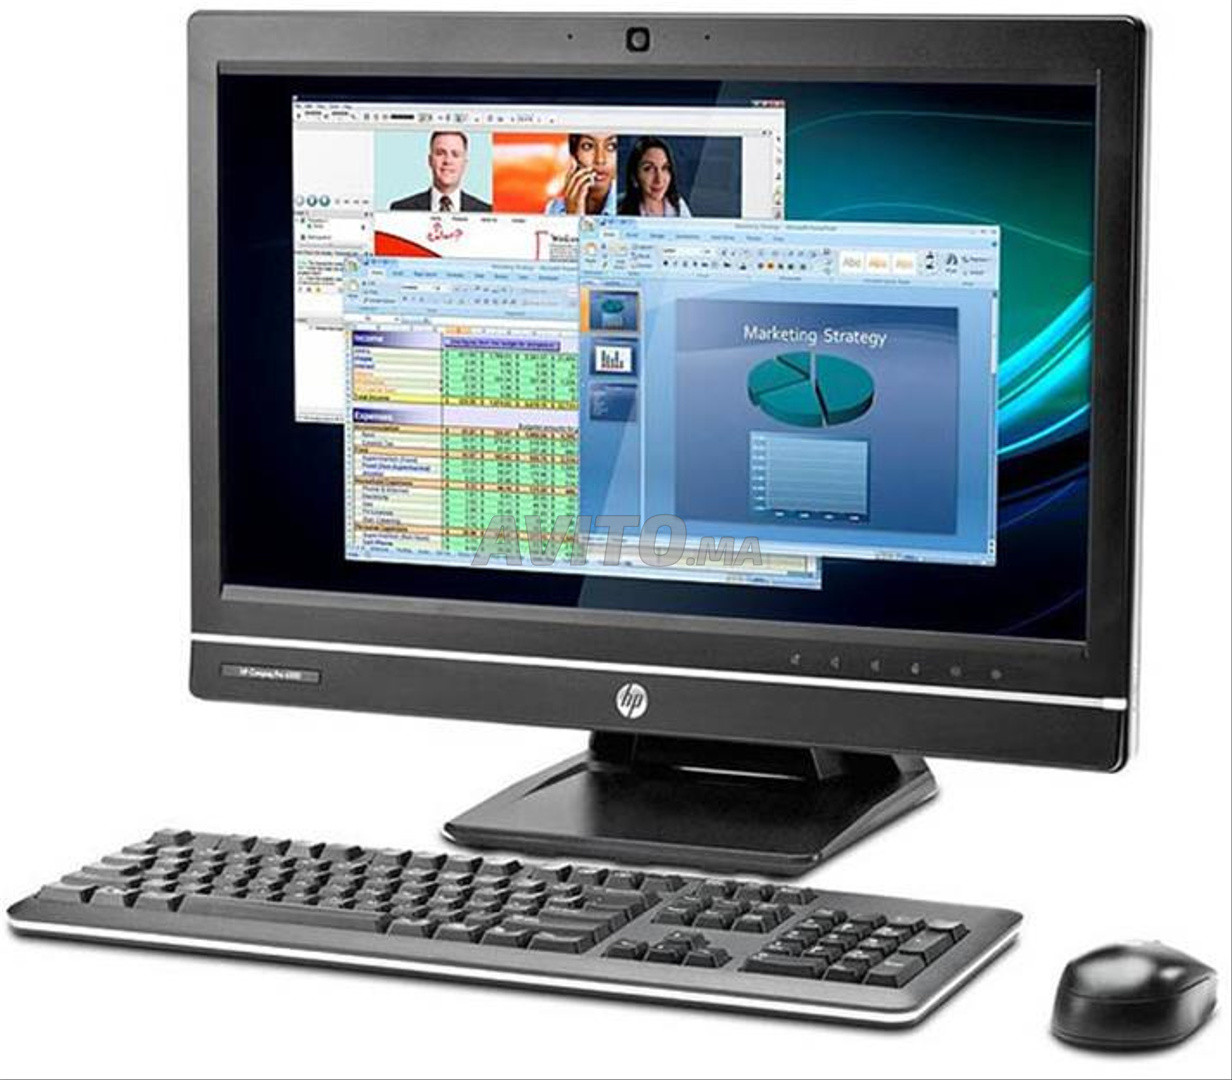 Pc Hp Aio 8300 A A Benmssik - 1